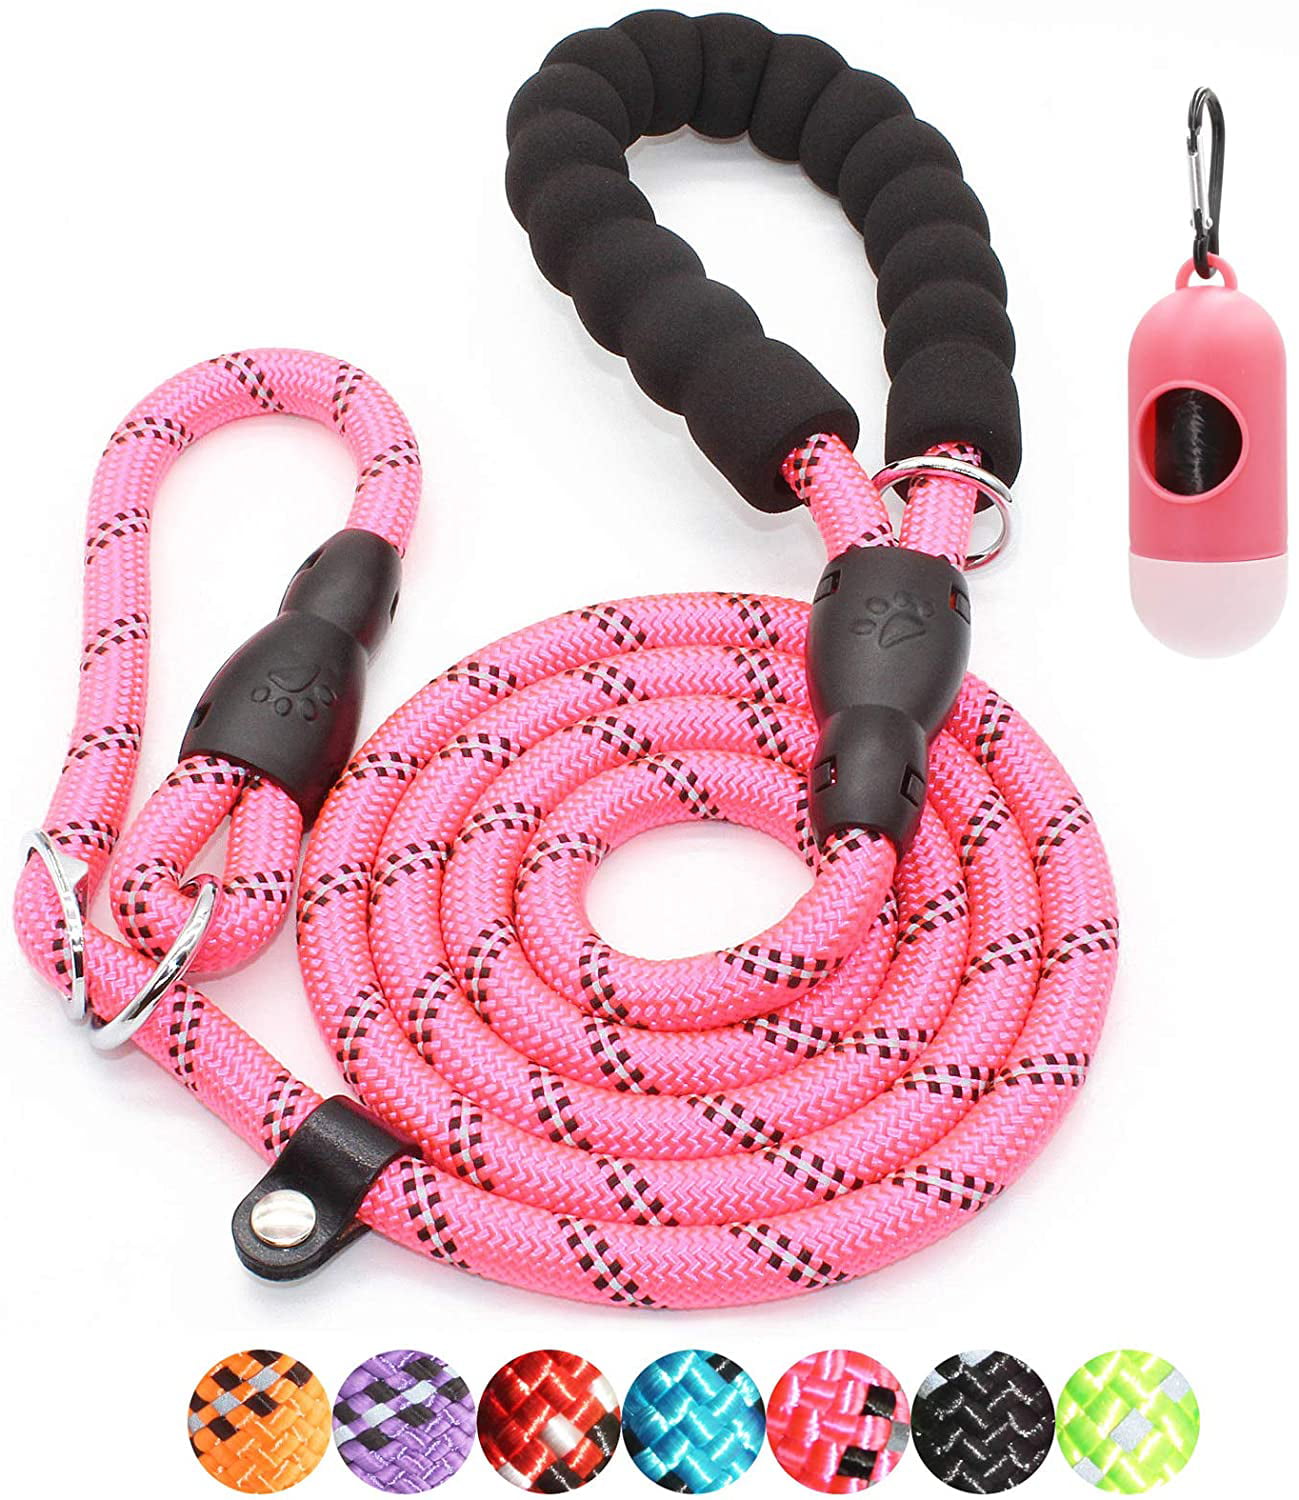 Medium Small Dogs Trainning with Poop Bags and Dispenser BAAPET 6 Feet Slip Lead Dog Leash Anti-Choking with Upgraded Durable Rope Cover and Comfortable Padded Handle for Large 